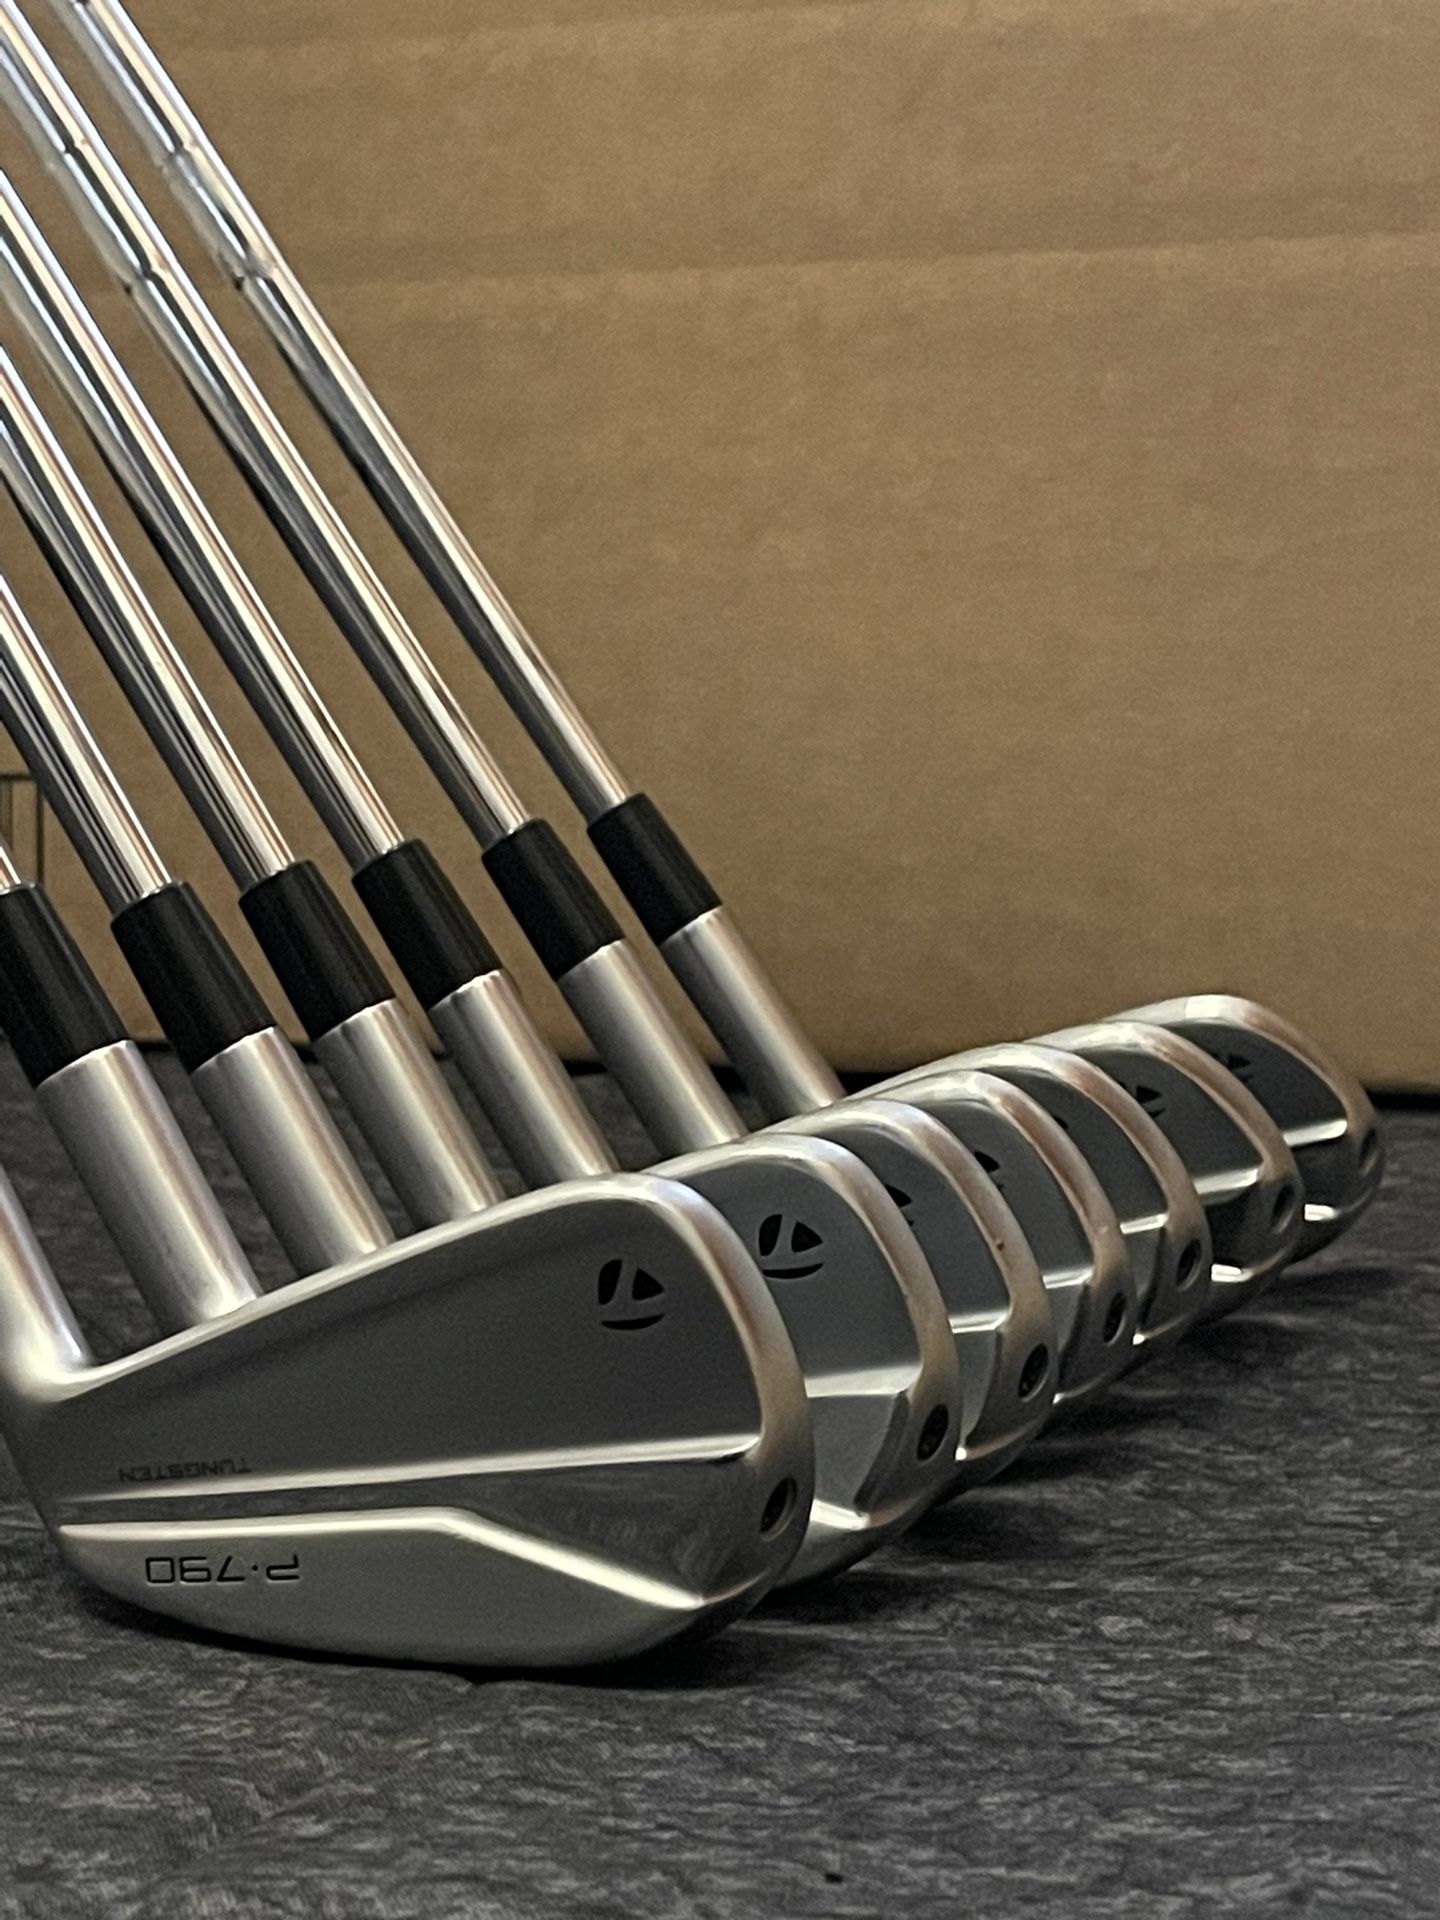 Taylor Made P790 Irons - 4I-PW - New grips